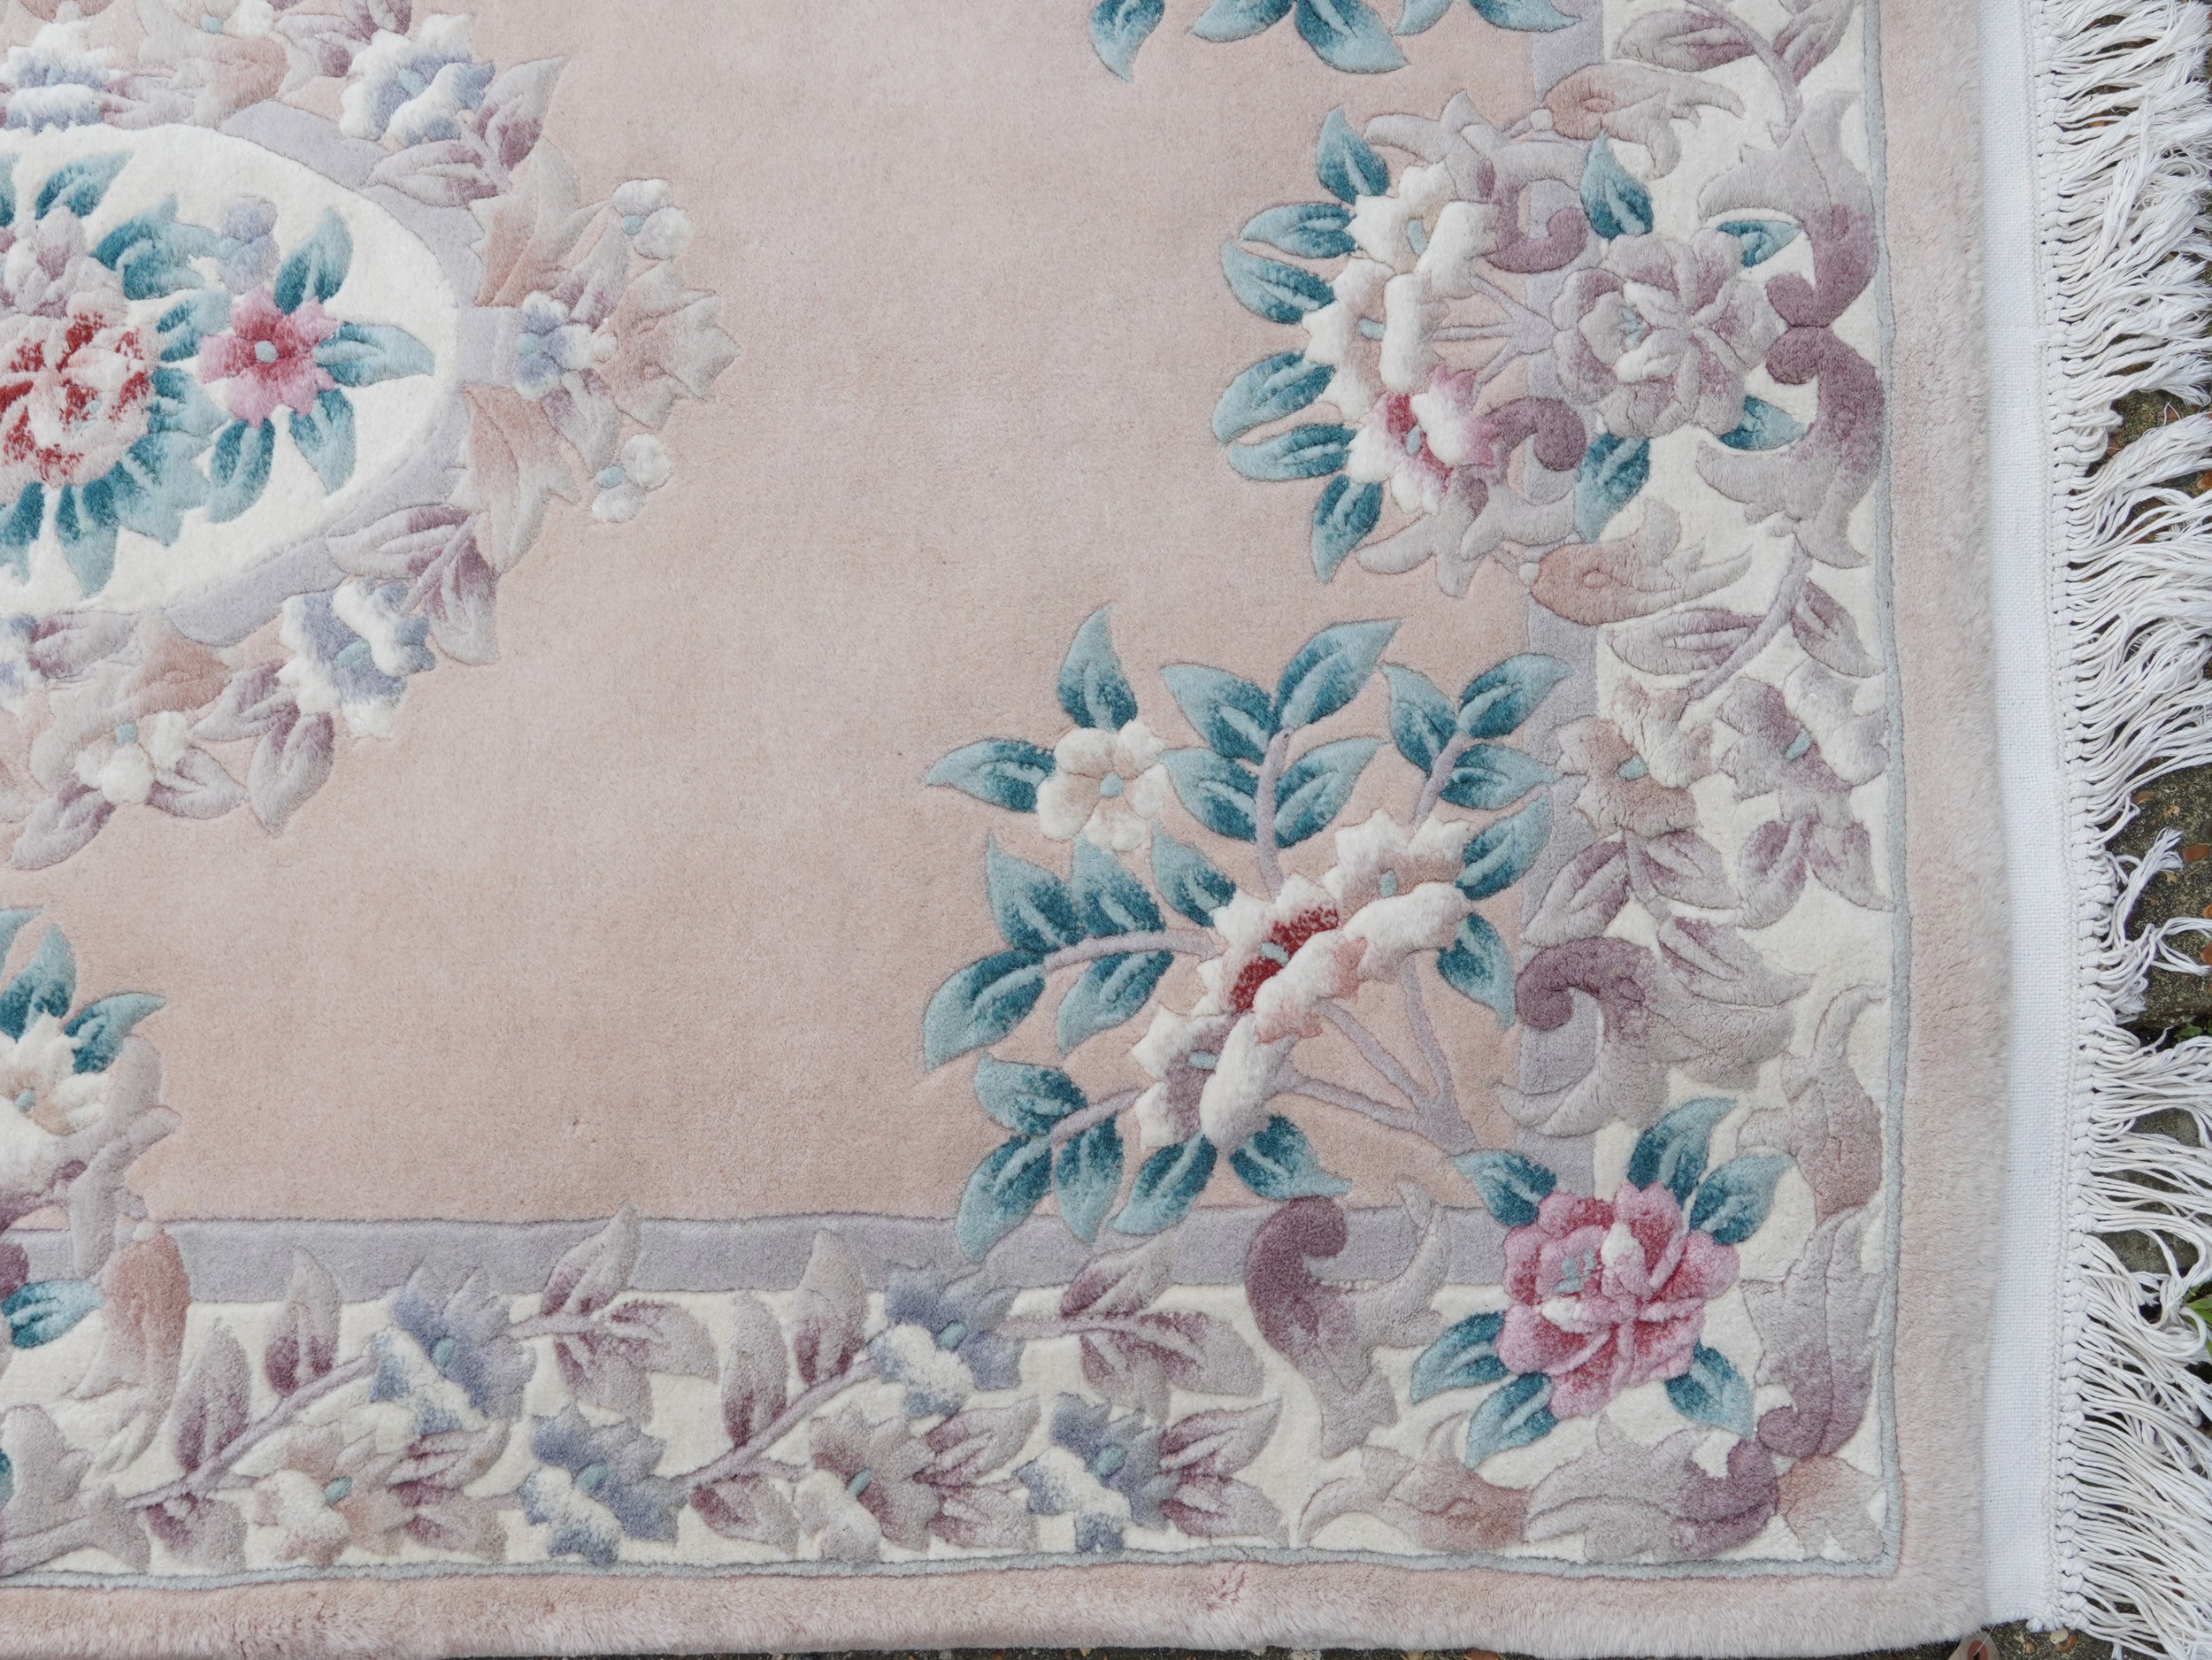 Two rectangular Chinese floral rugs, the largest 195cm x 122cm - Image 12 of 13